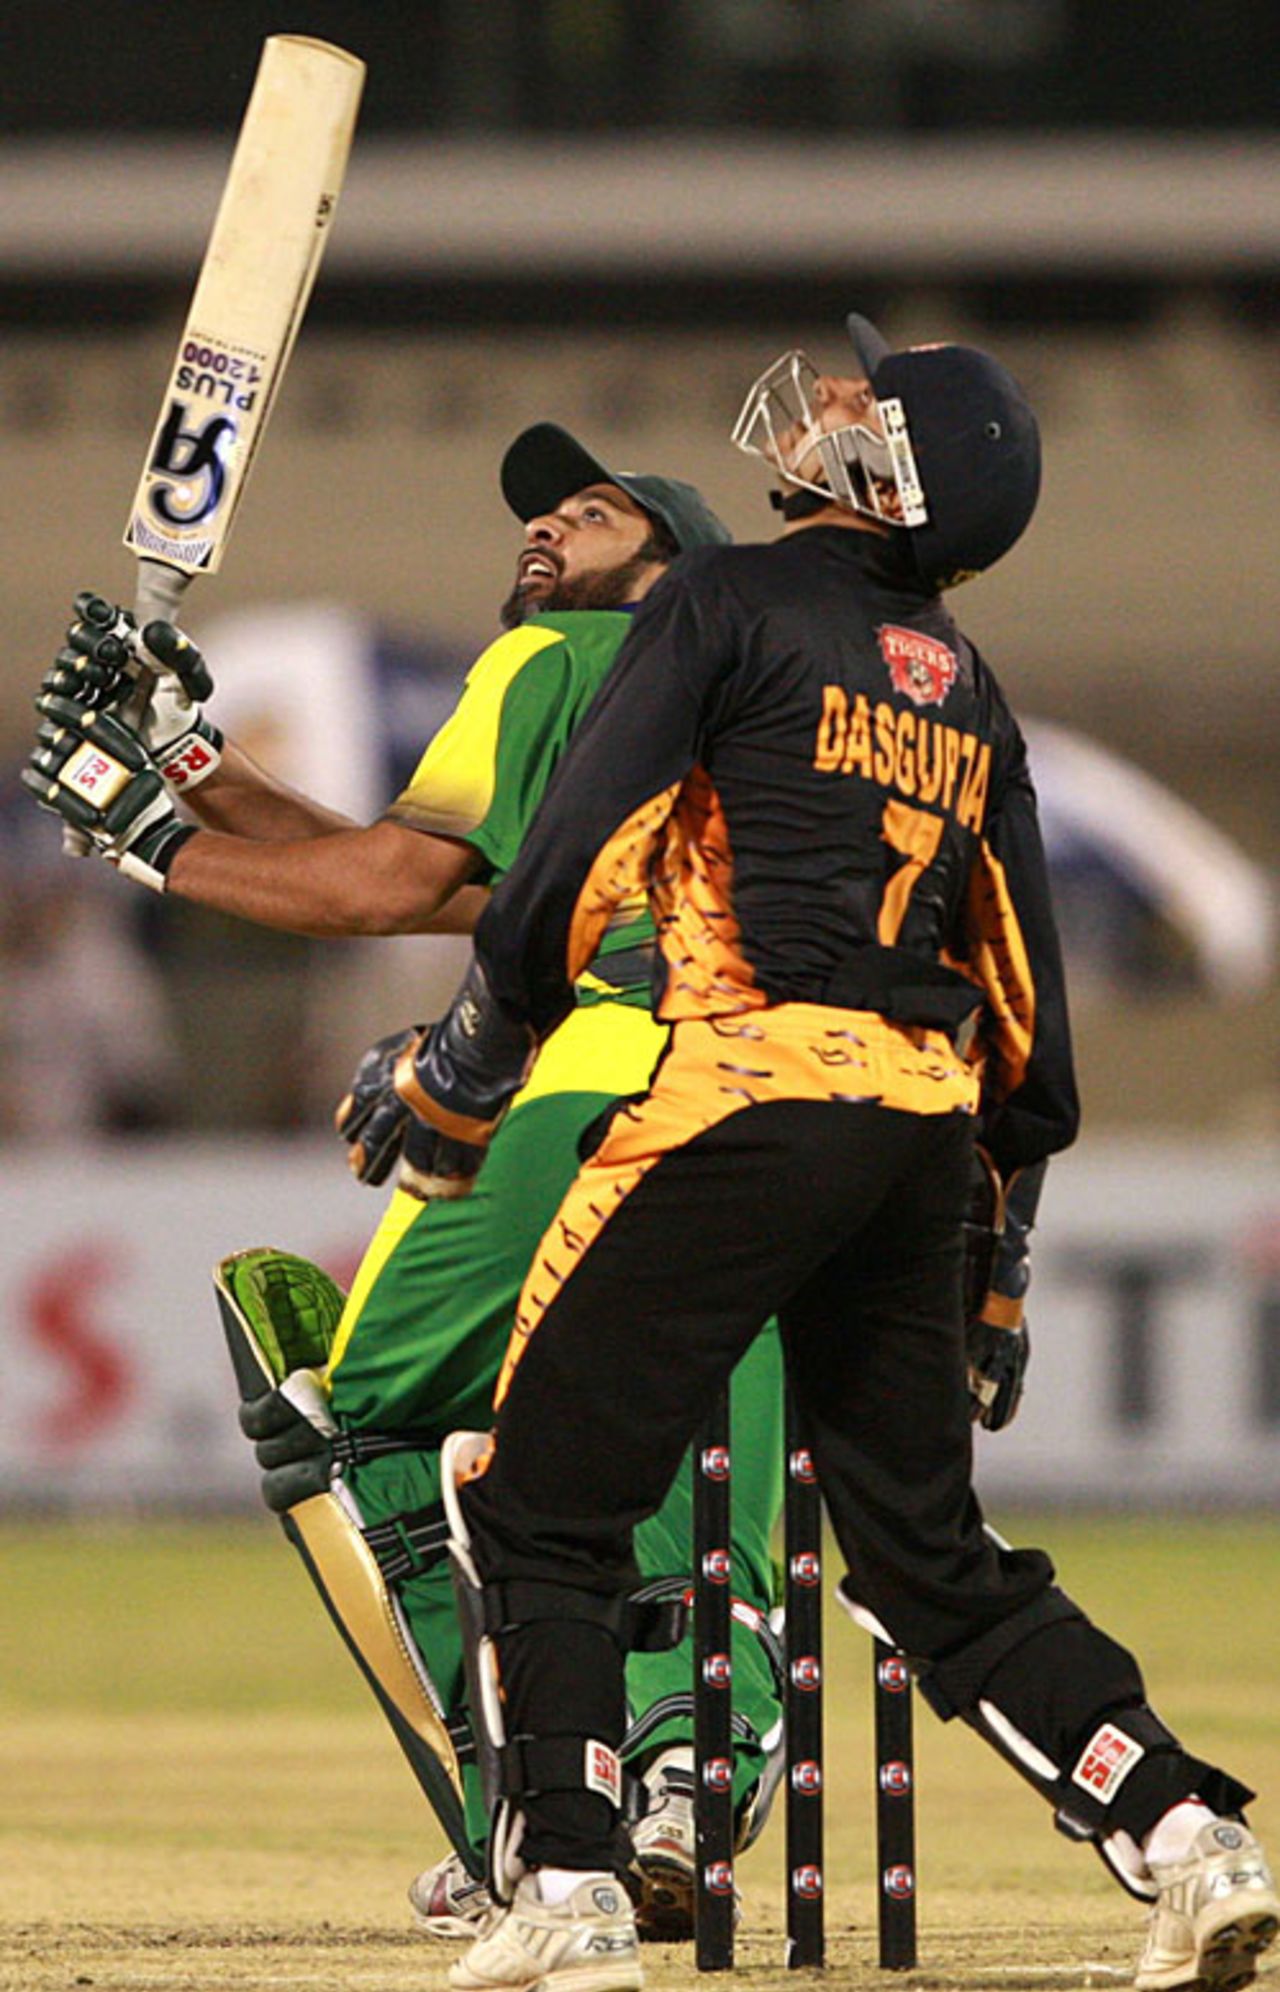 Inzamam-ul-Haq was out caught behind for 19, Lahore Badshahs v Royal Bengal Tigers, ICL, Hyderabad, October 12, 2008